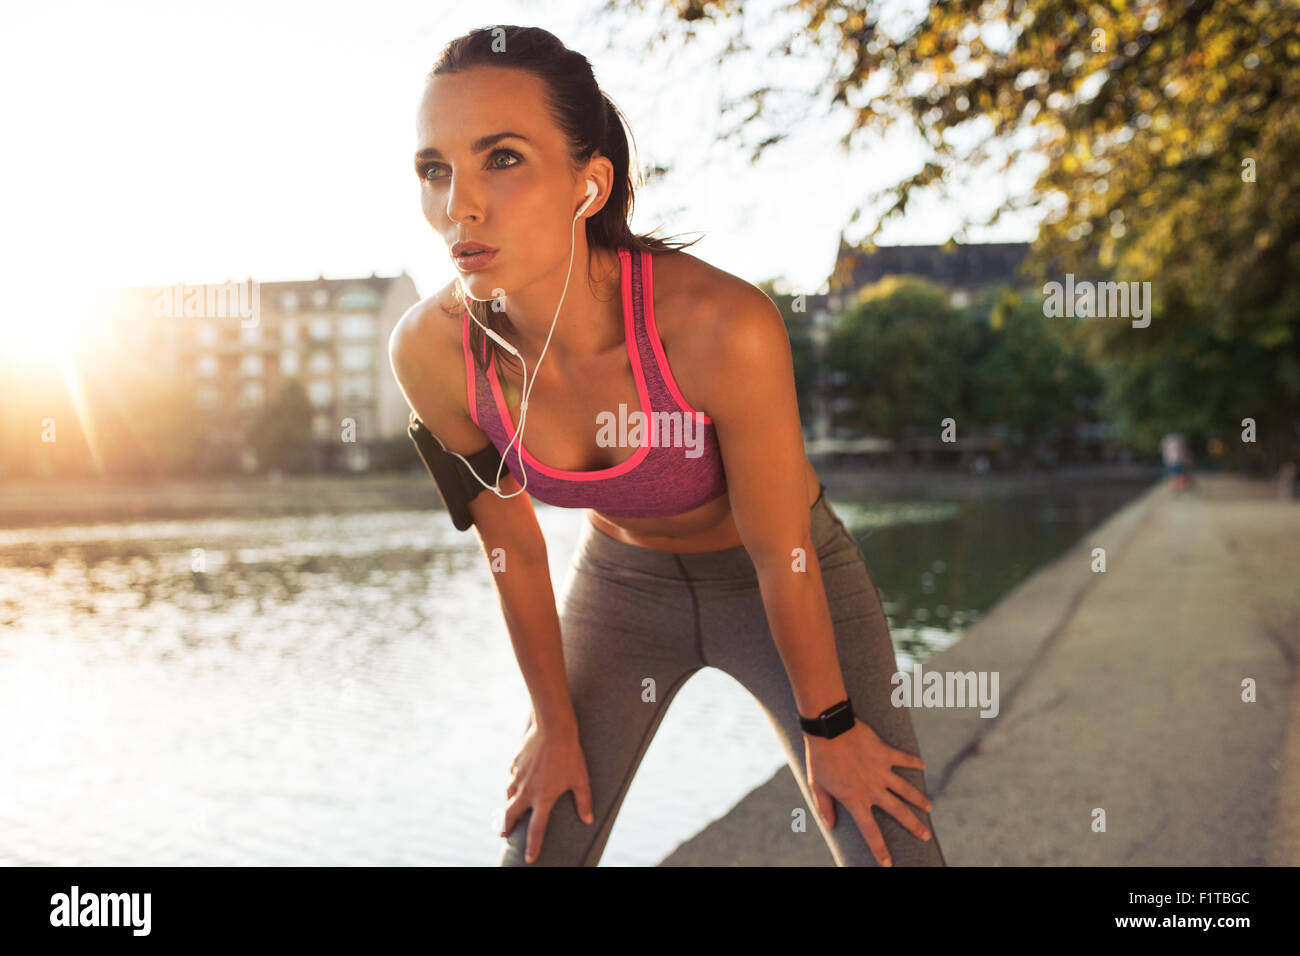 Female runner standing bent over and catching her breath after a running session along lake in city. Young sports woman taking b Stock Photo